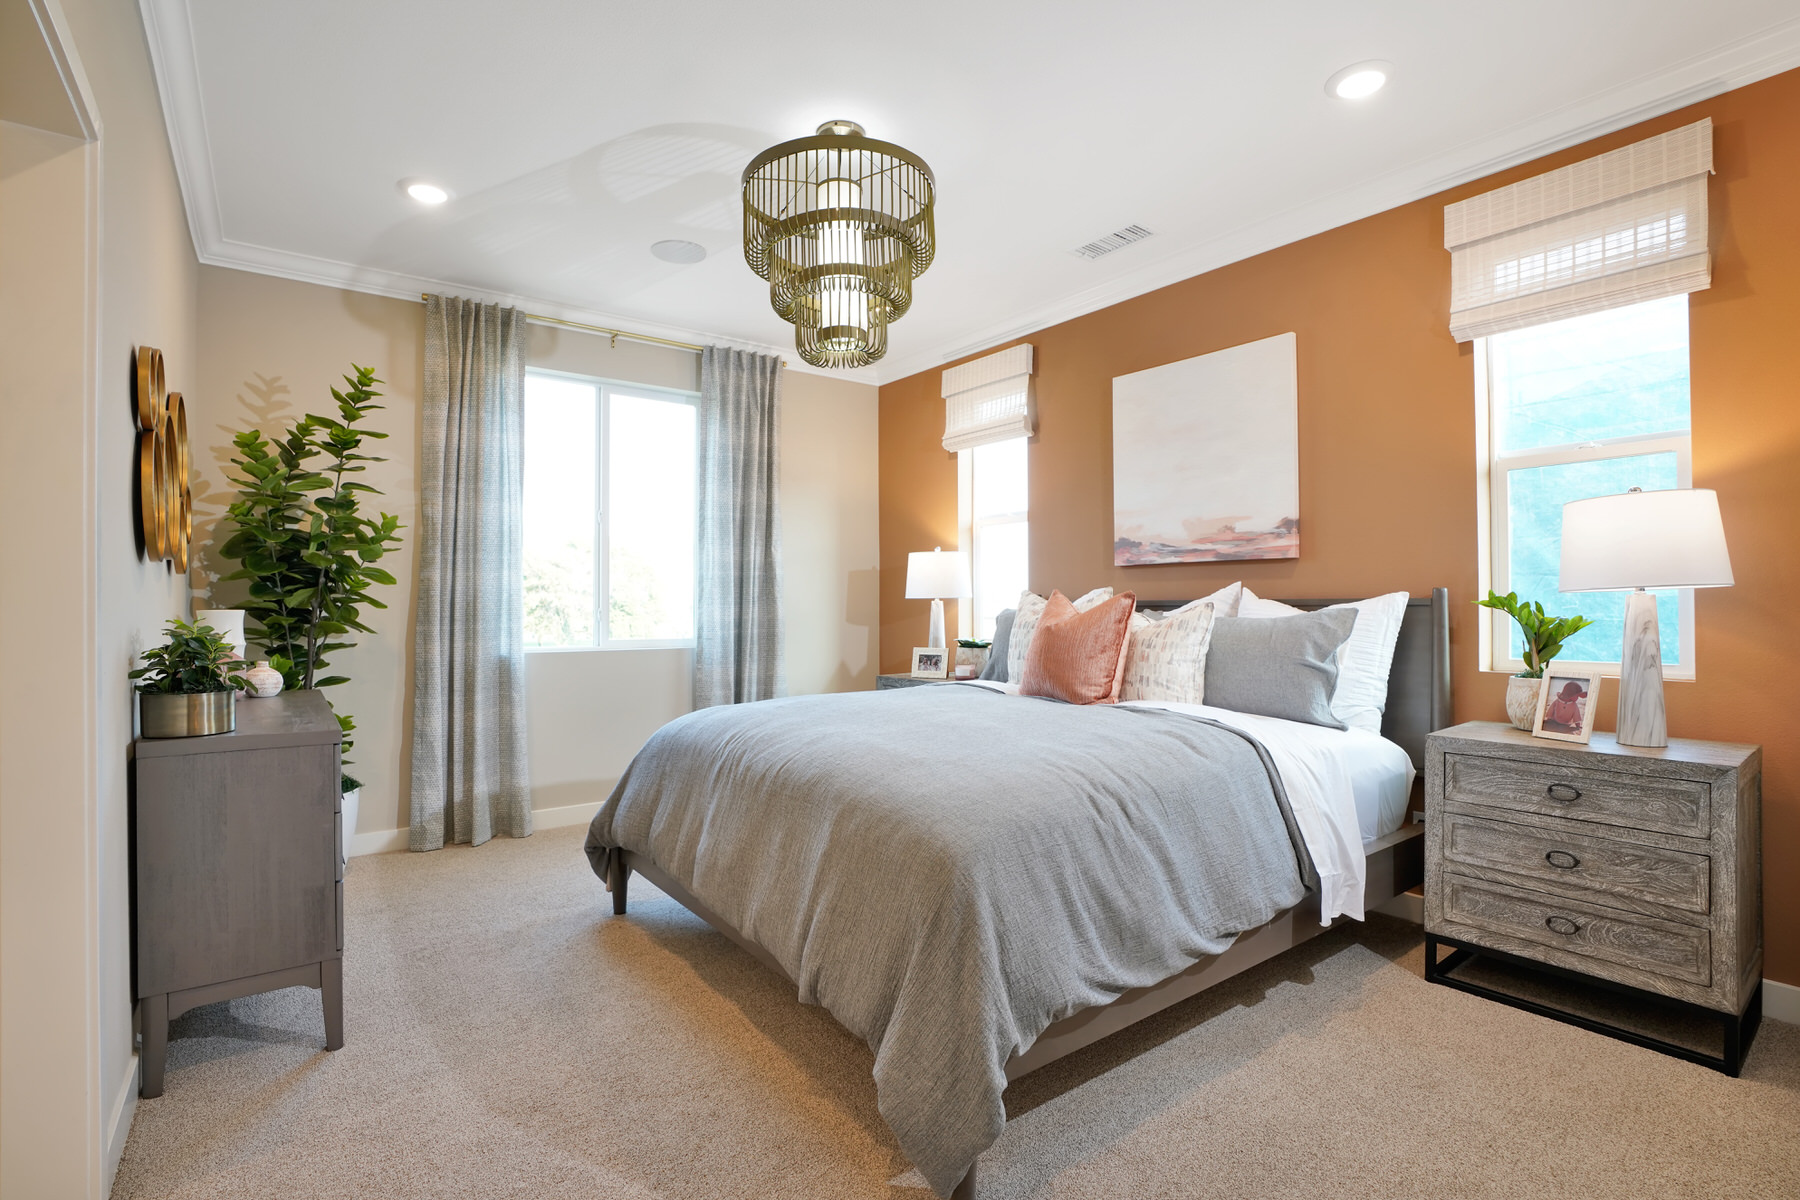 Primary Bedroom in Plan 4A at Townes at Magnolia by Melia Homes in Anaheim, CA